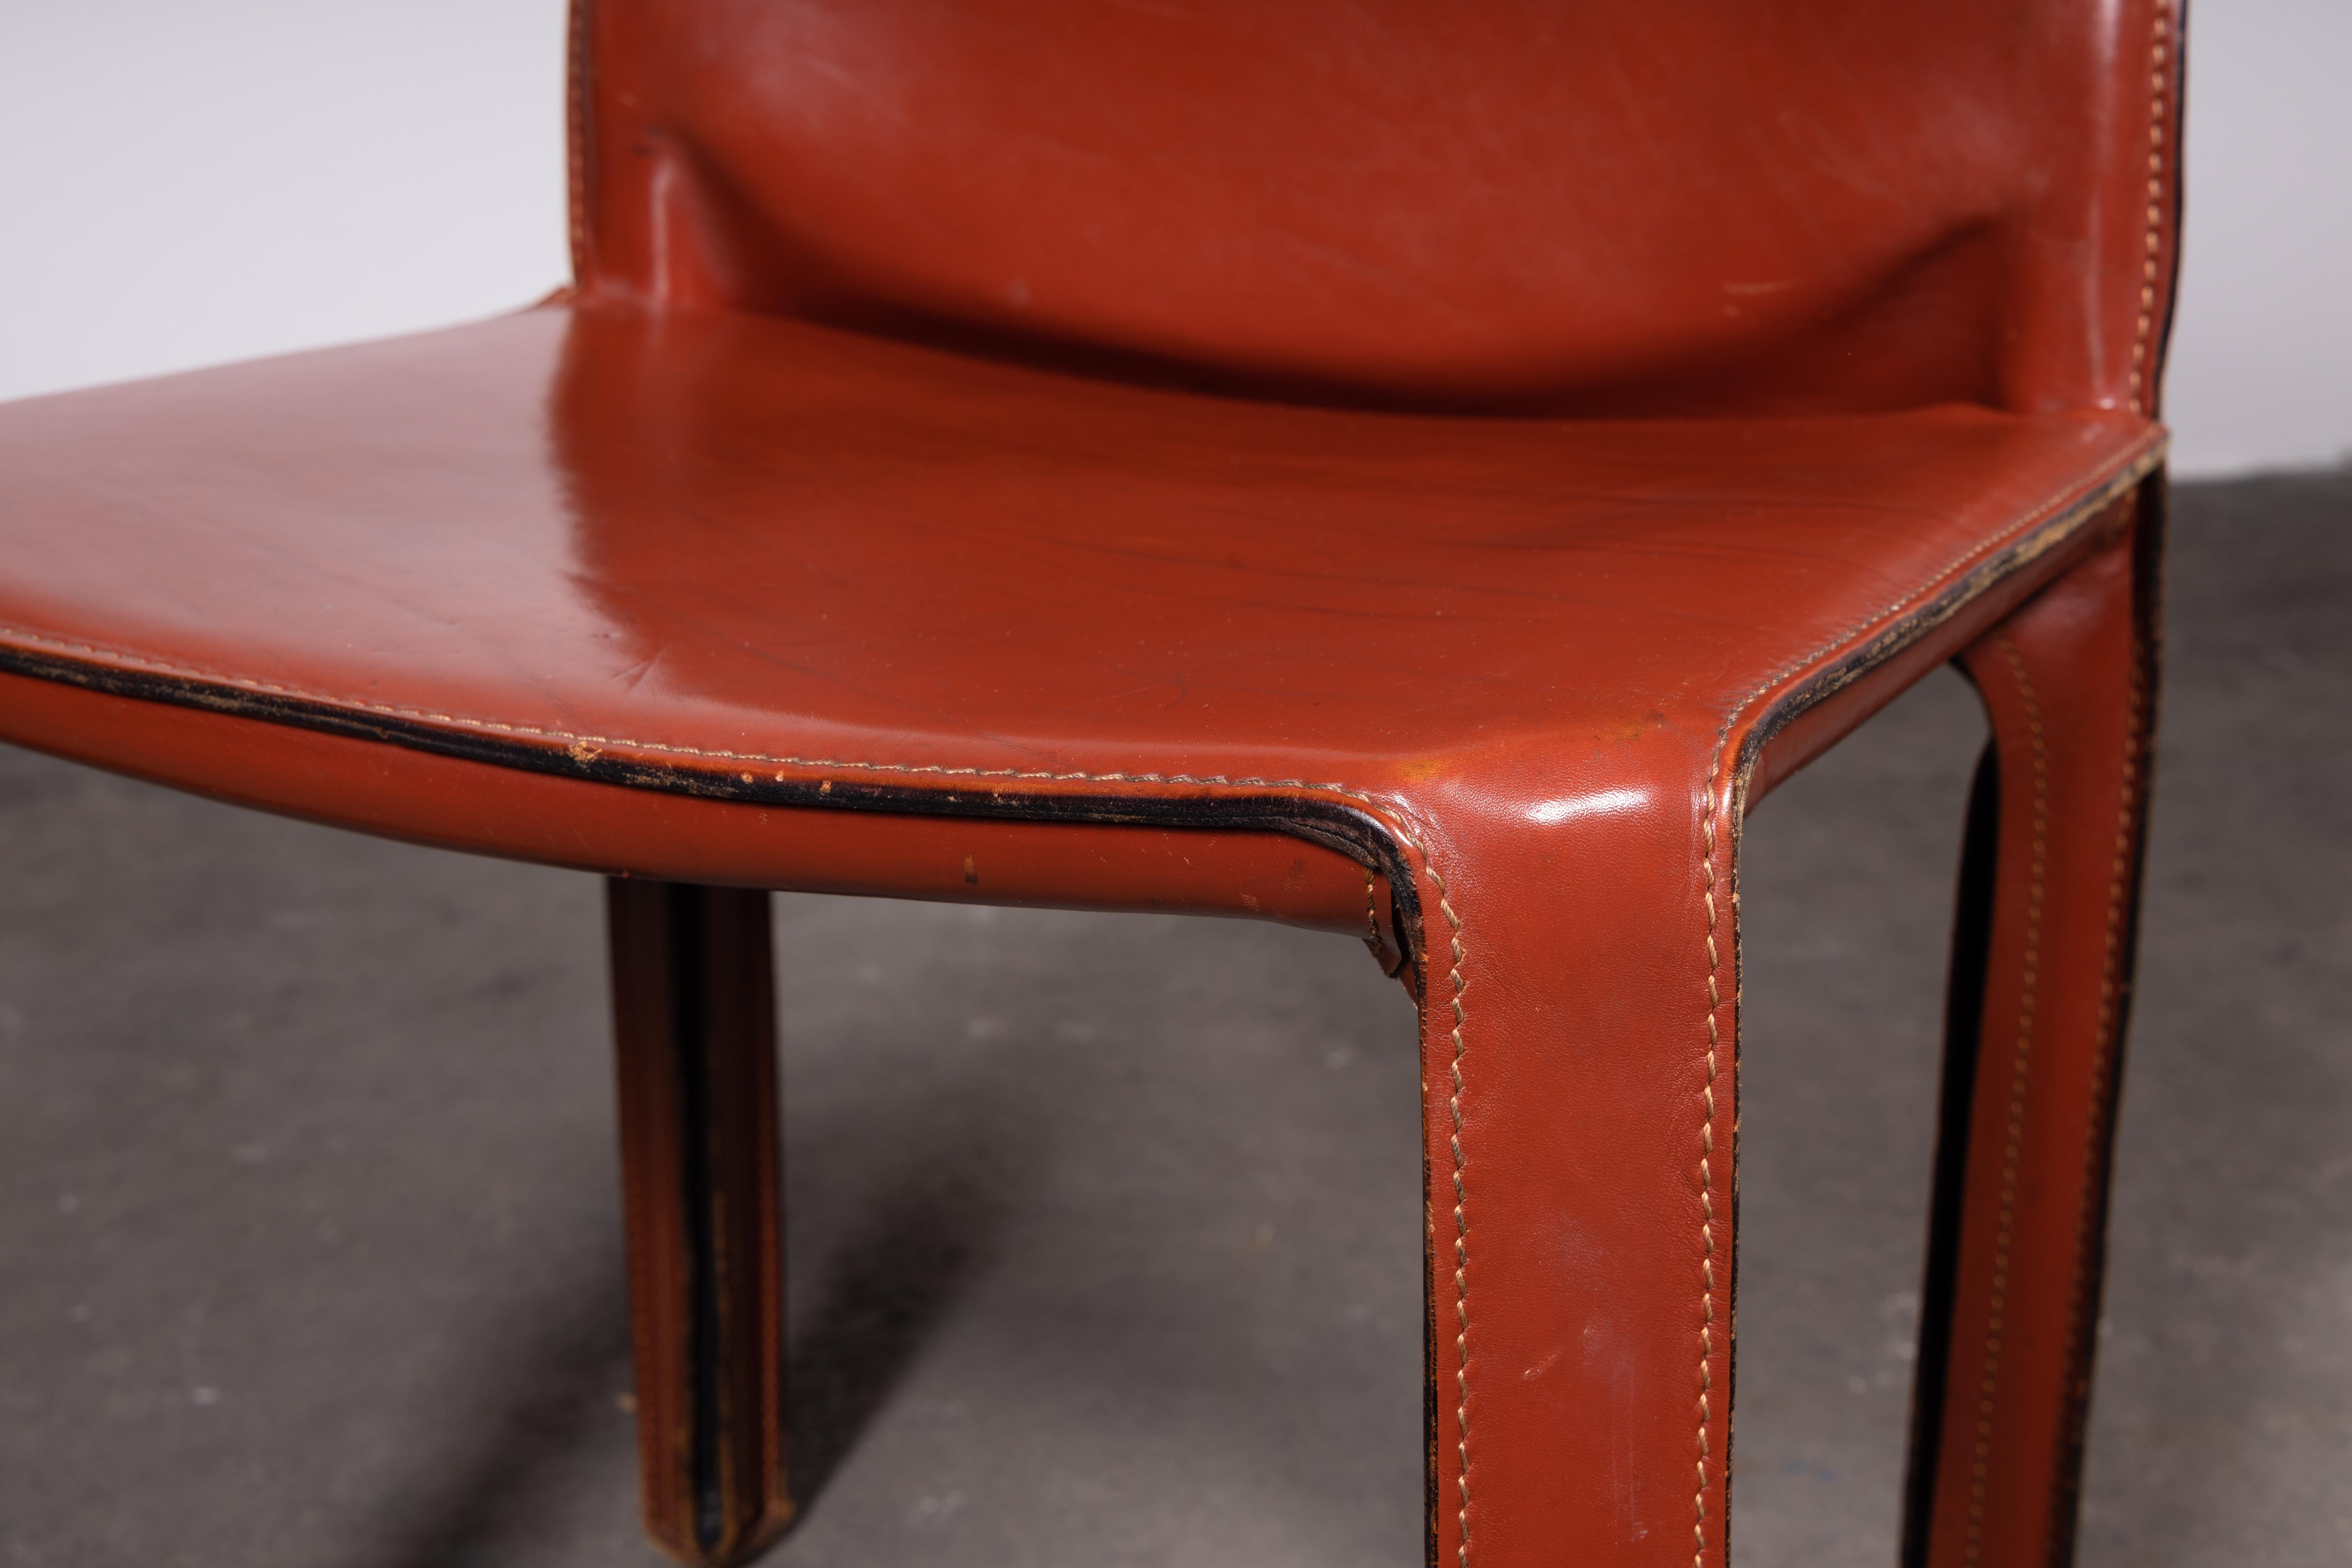 20th Century Pair of Early Mario Bellini CAB 412 Chairs in Russian Red Leather for Cassina